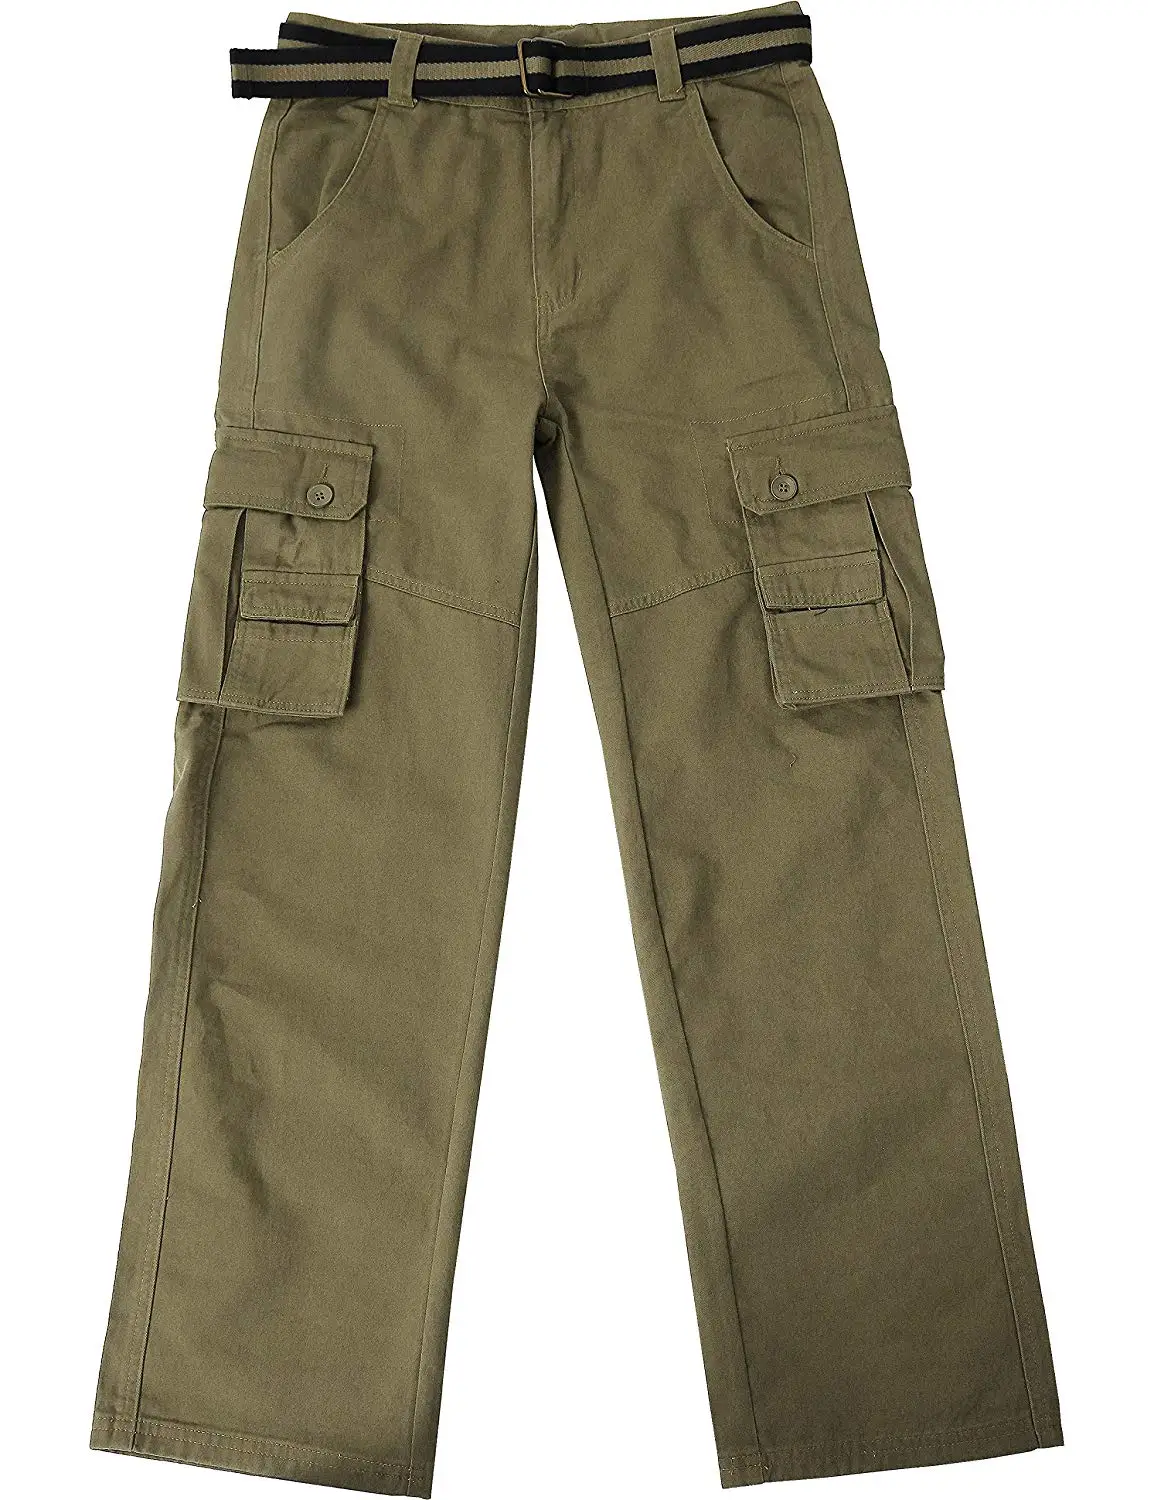 Cheap Mens Cargo Pants India, find Mens Cargo Pants India deals on line ...